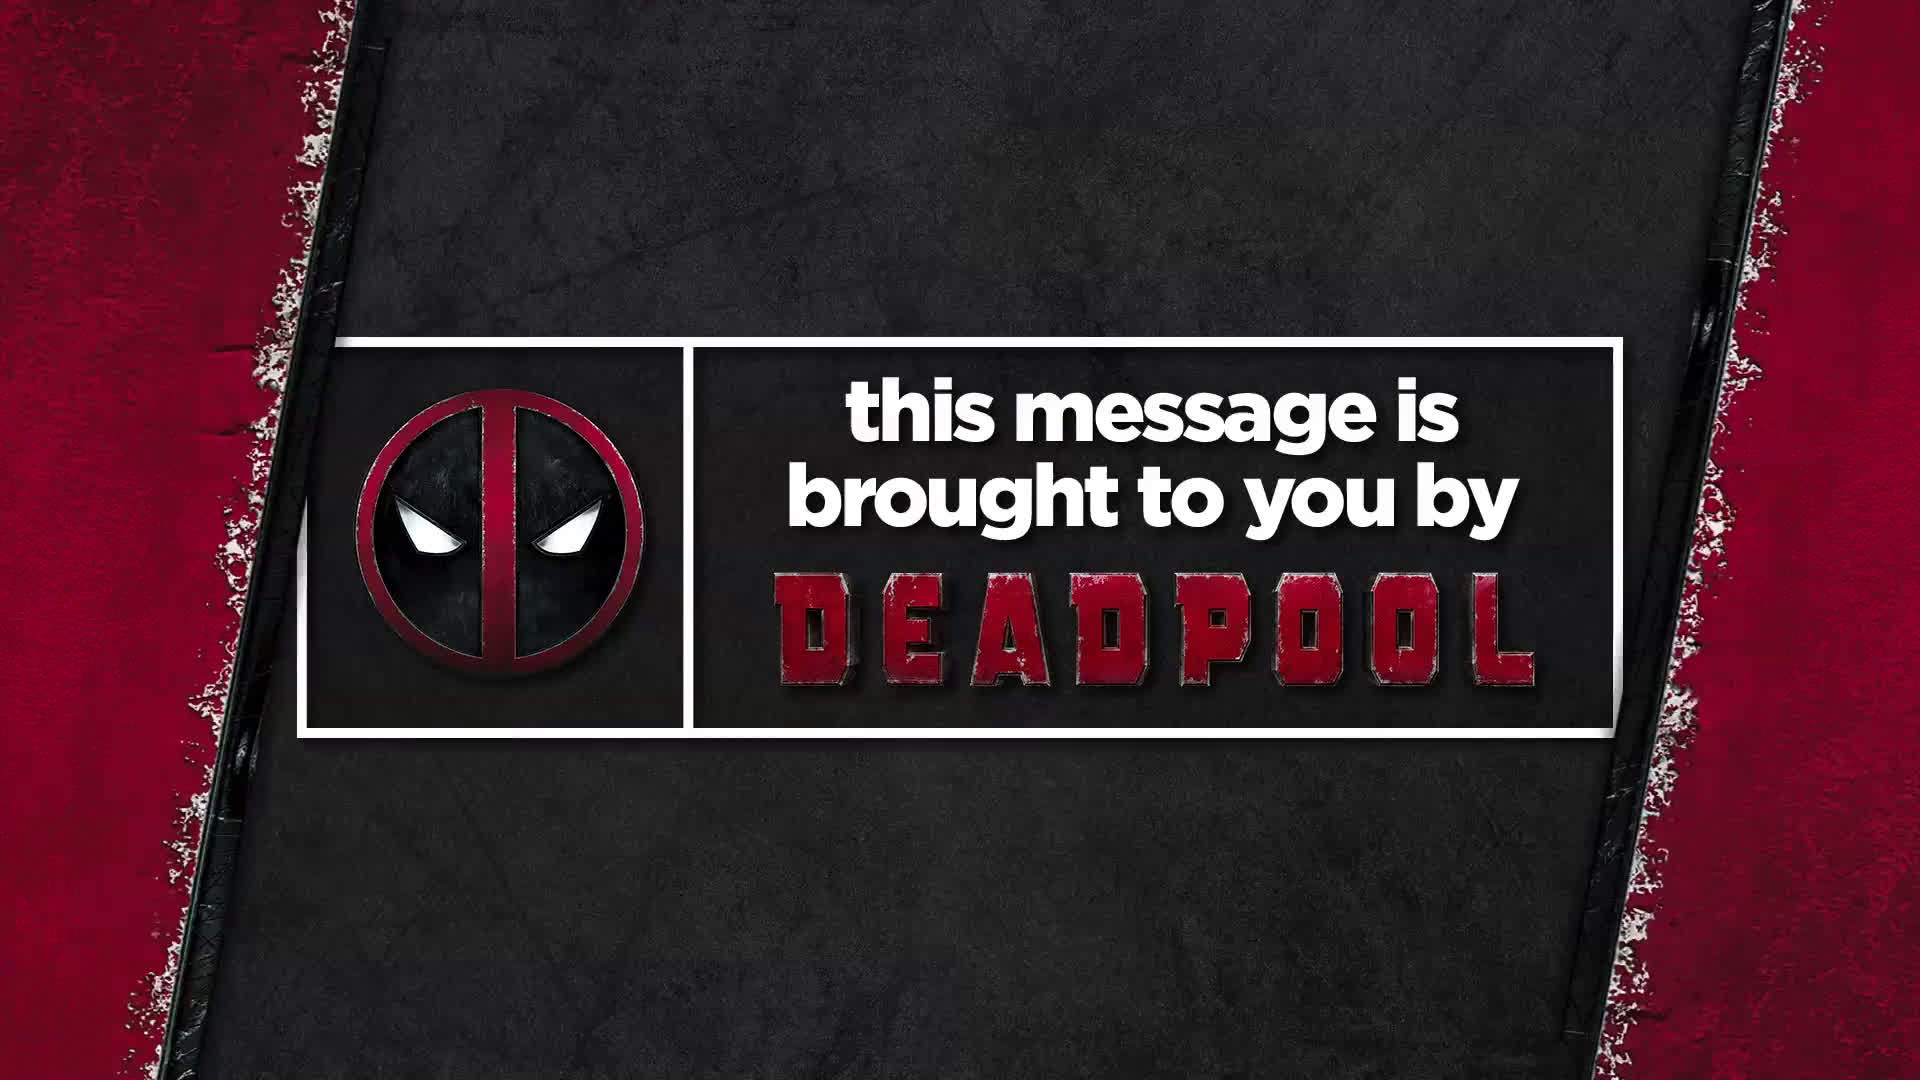 Deadpool "Touch Yourself Tonight" campaign